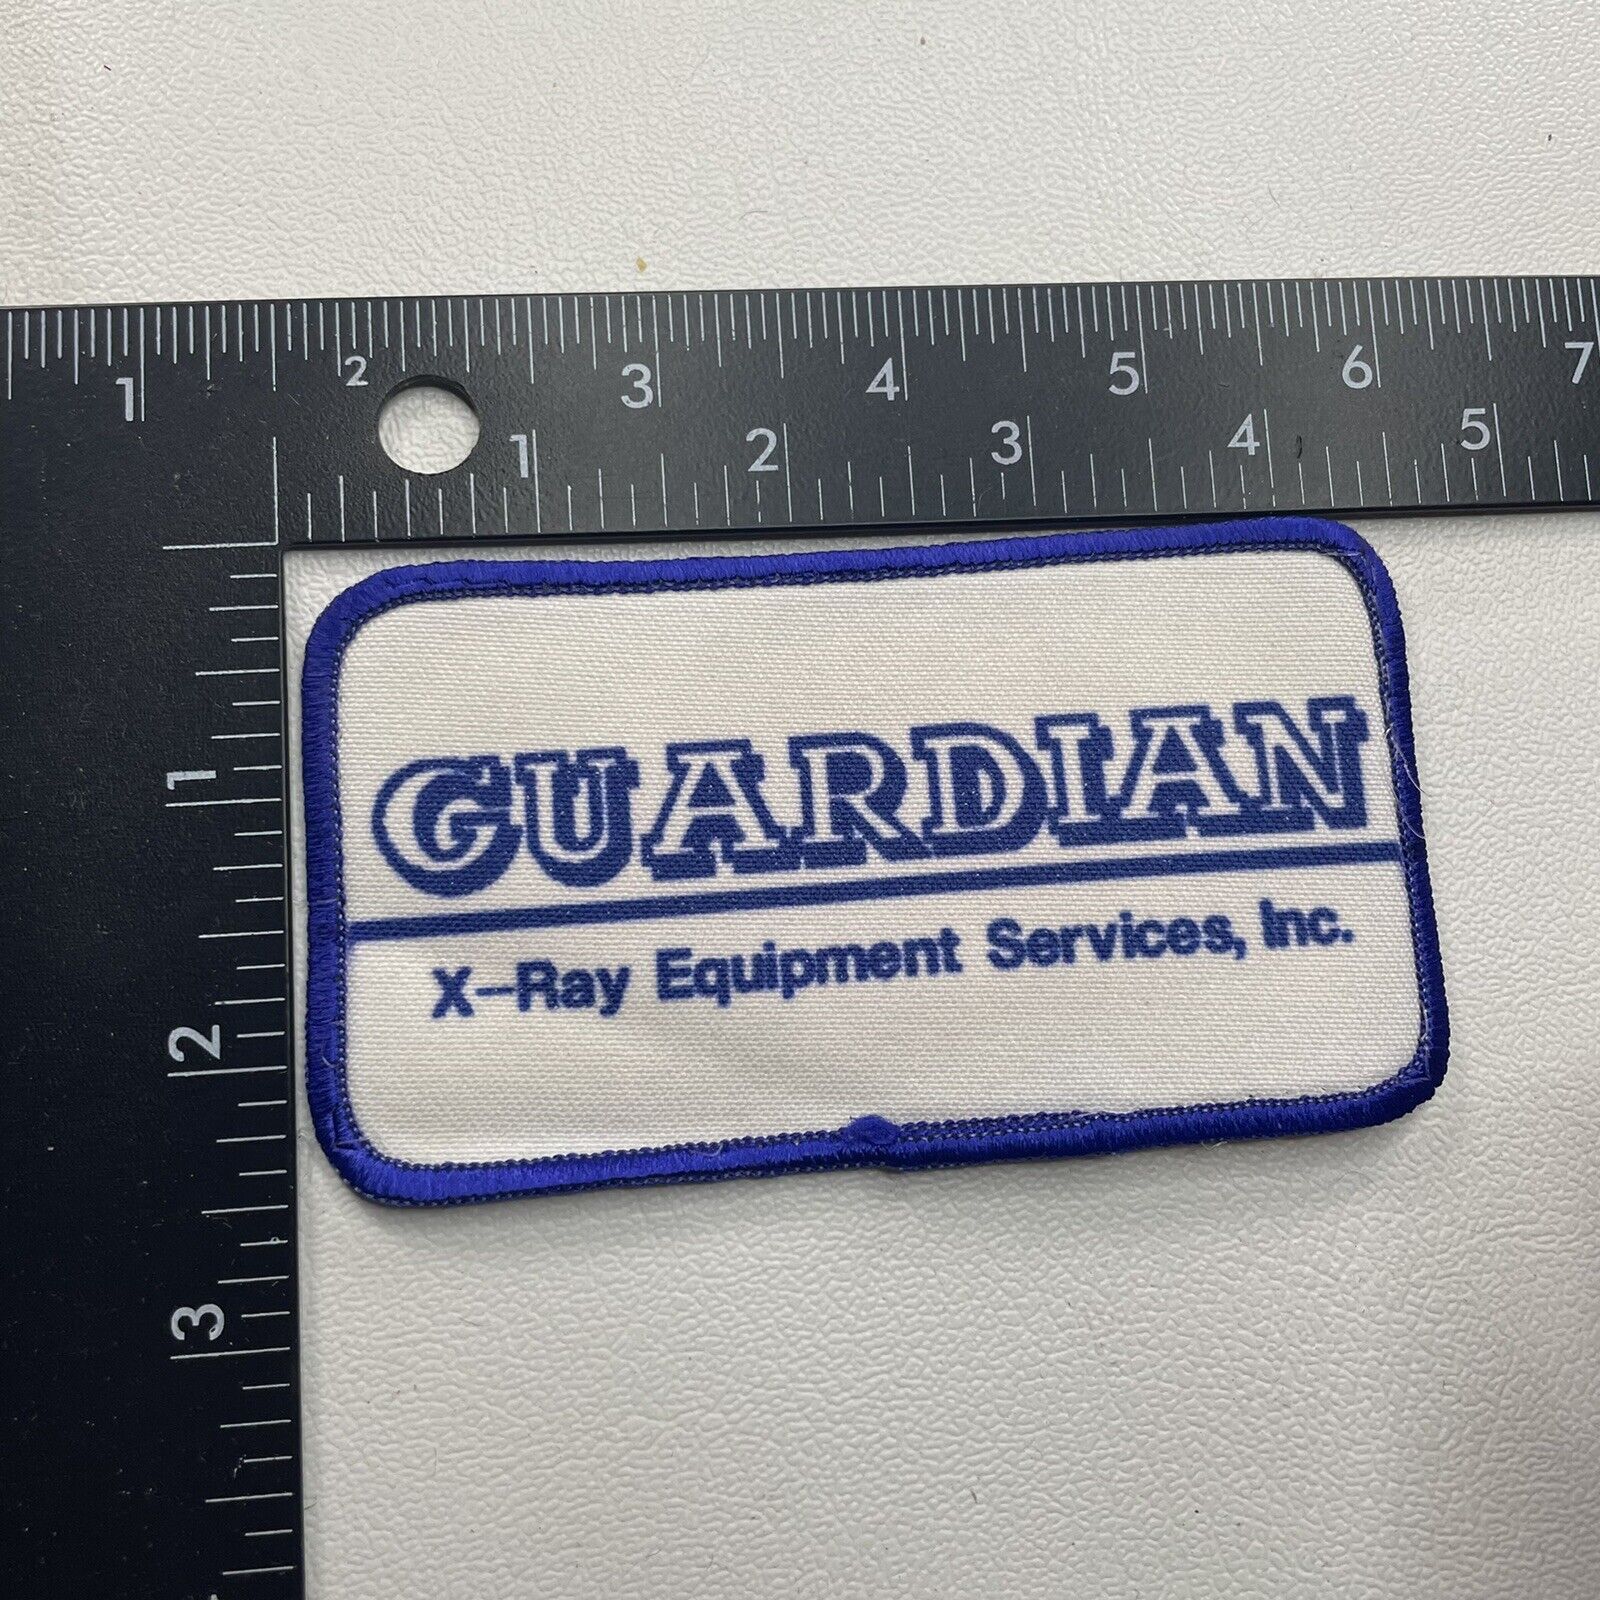 GUARDIAN X-RAY EQUIPMENT SERVICES INC. Advertising Patch O23I